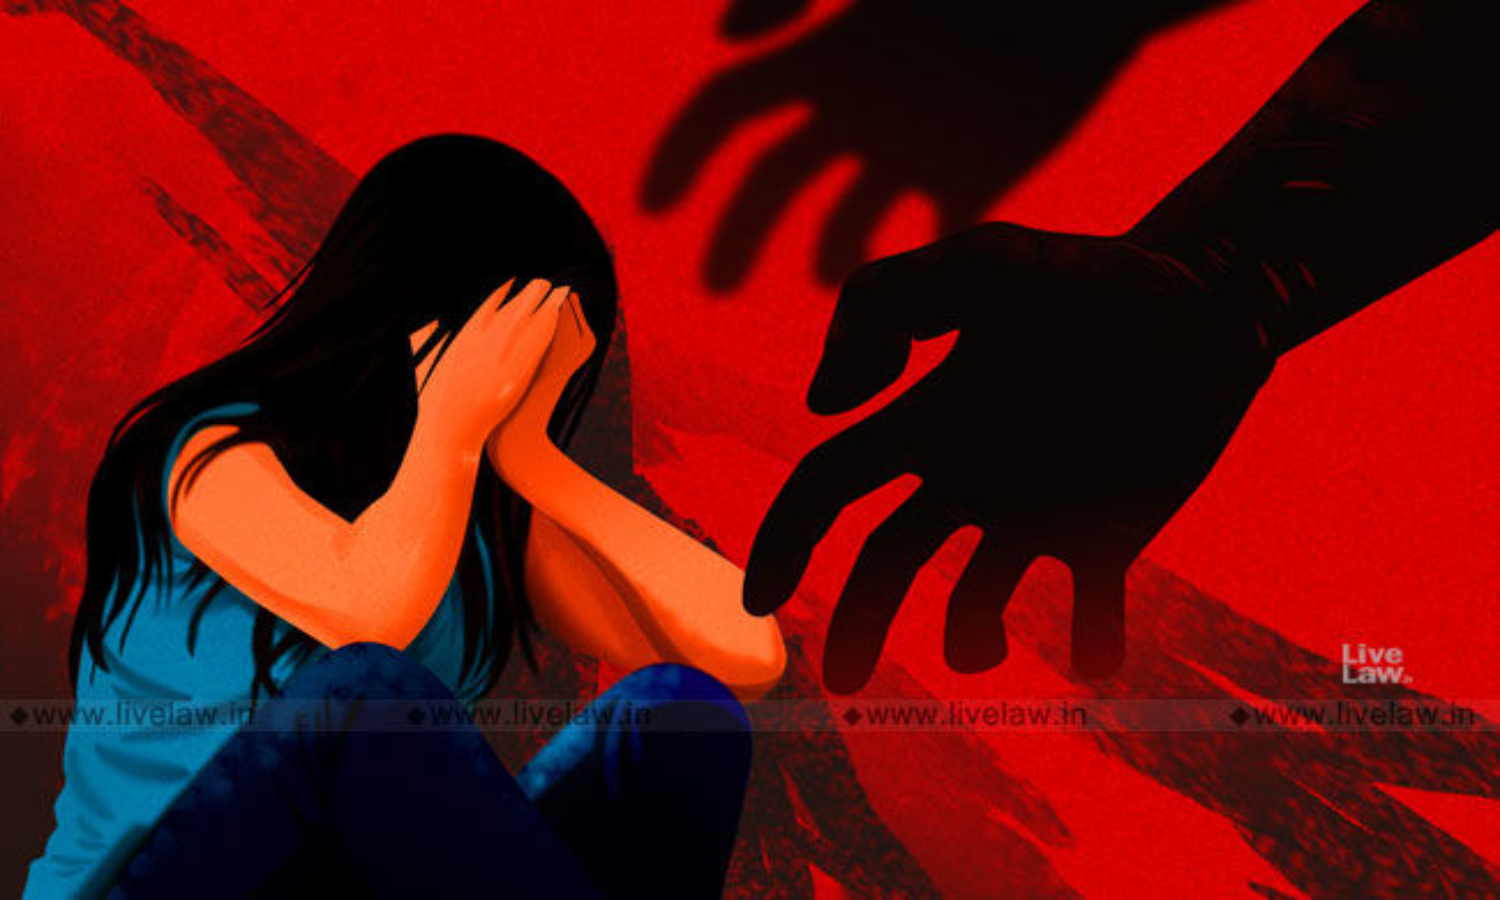 20 Years Rigours And Fine Amount Of Rs. 50,000/- To Accused For Sexually Abusing Of Minor Girl